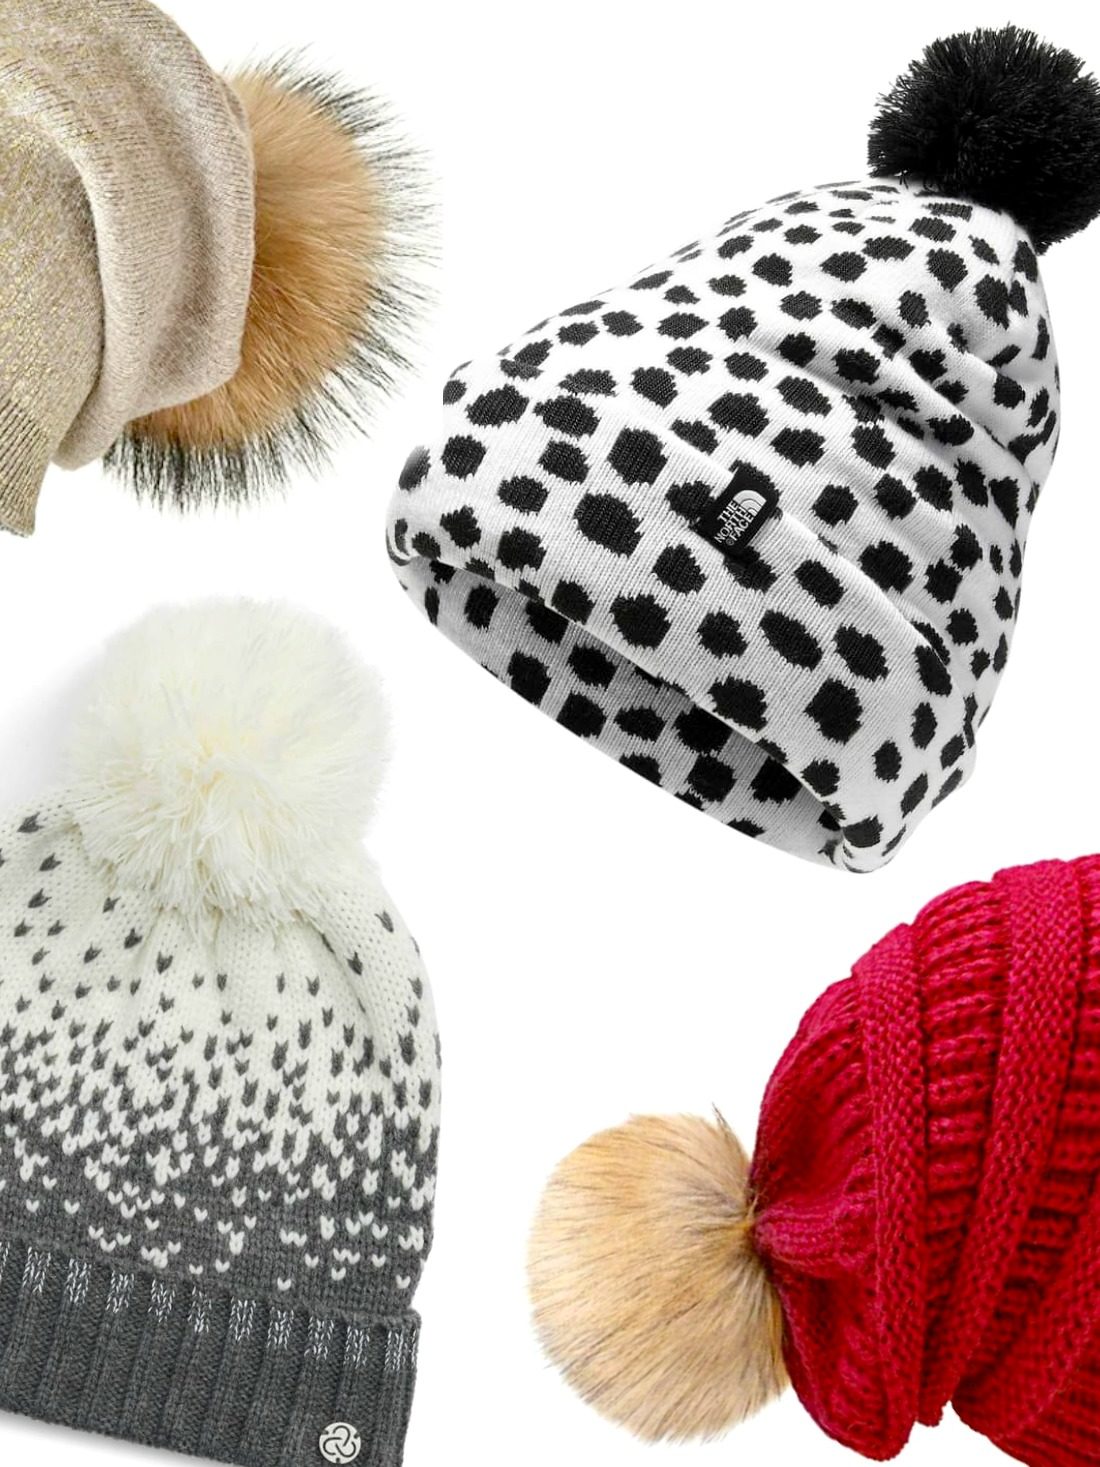 Best Womens Bobble Hat You Have To Buy 